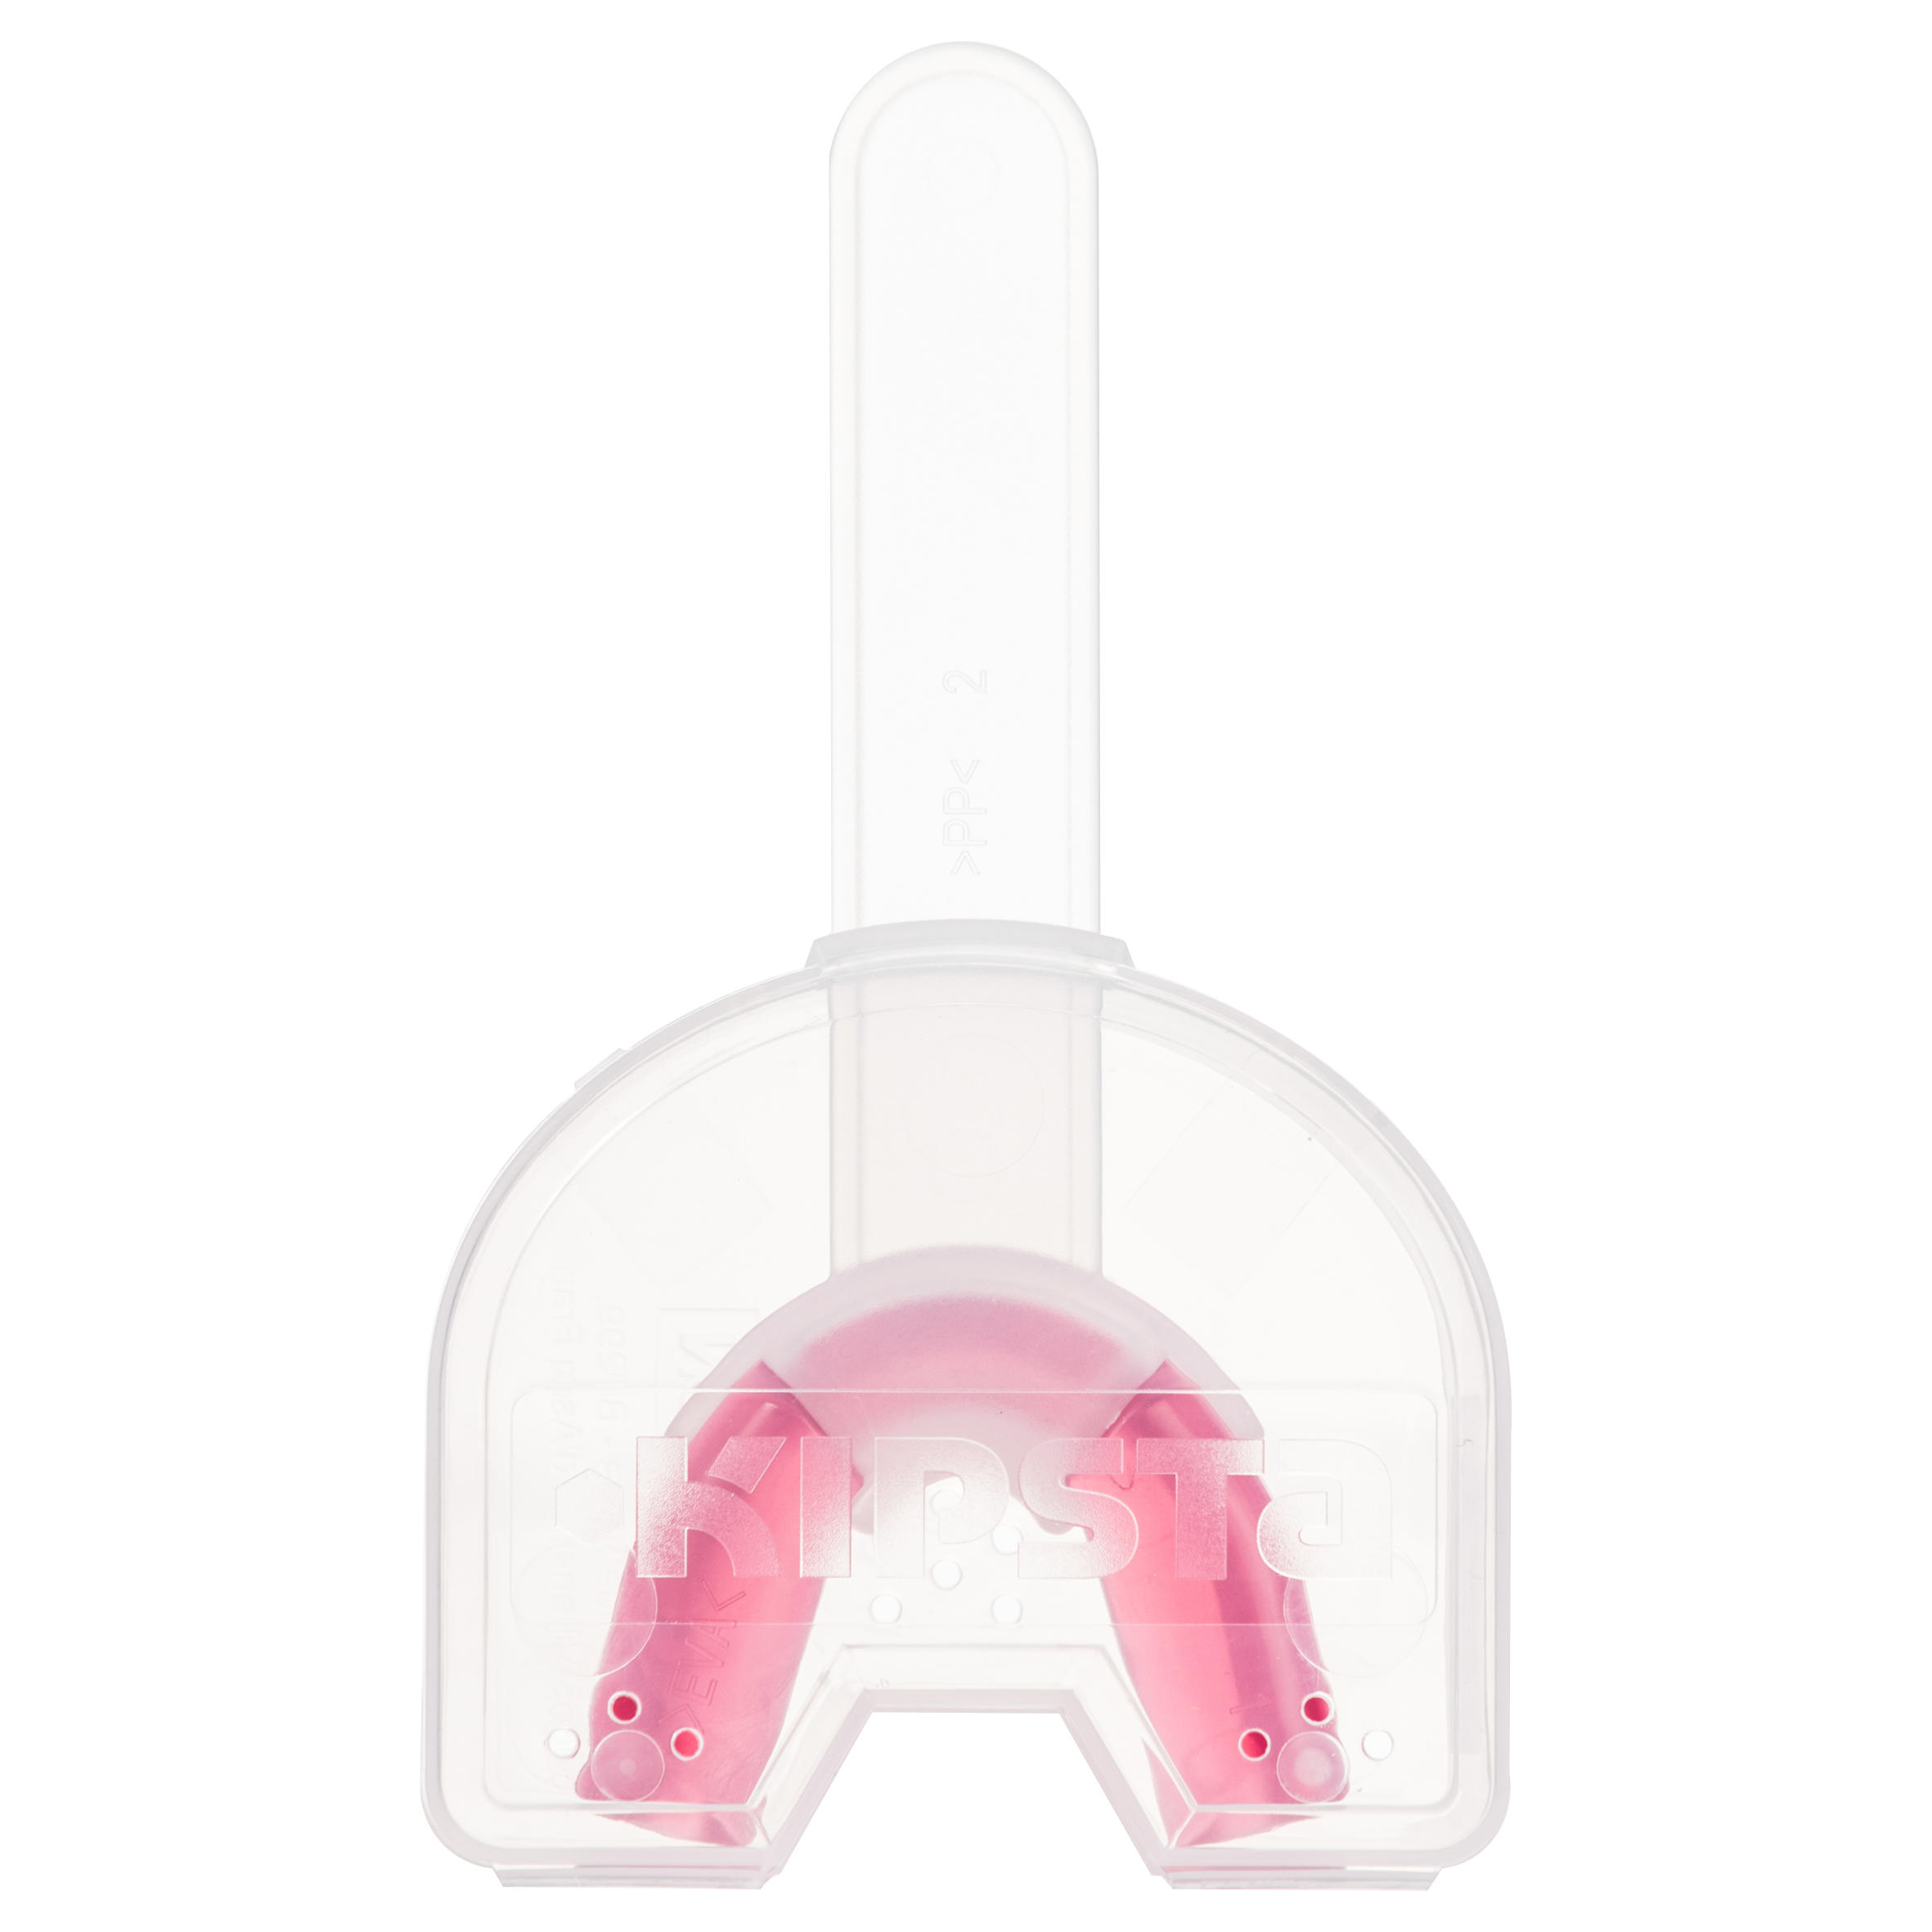 Kids' Low Intensity Field Hockey Mouthguard Size Small FH100 - Pink 8/16